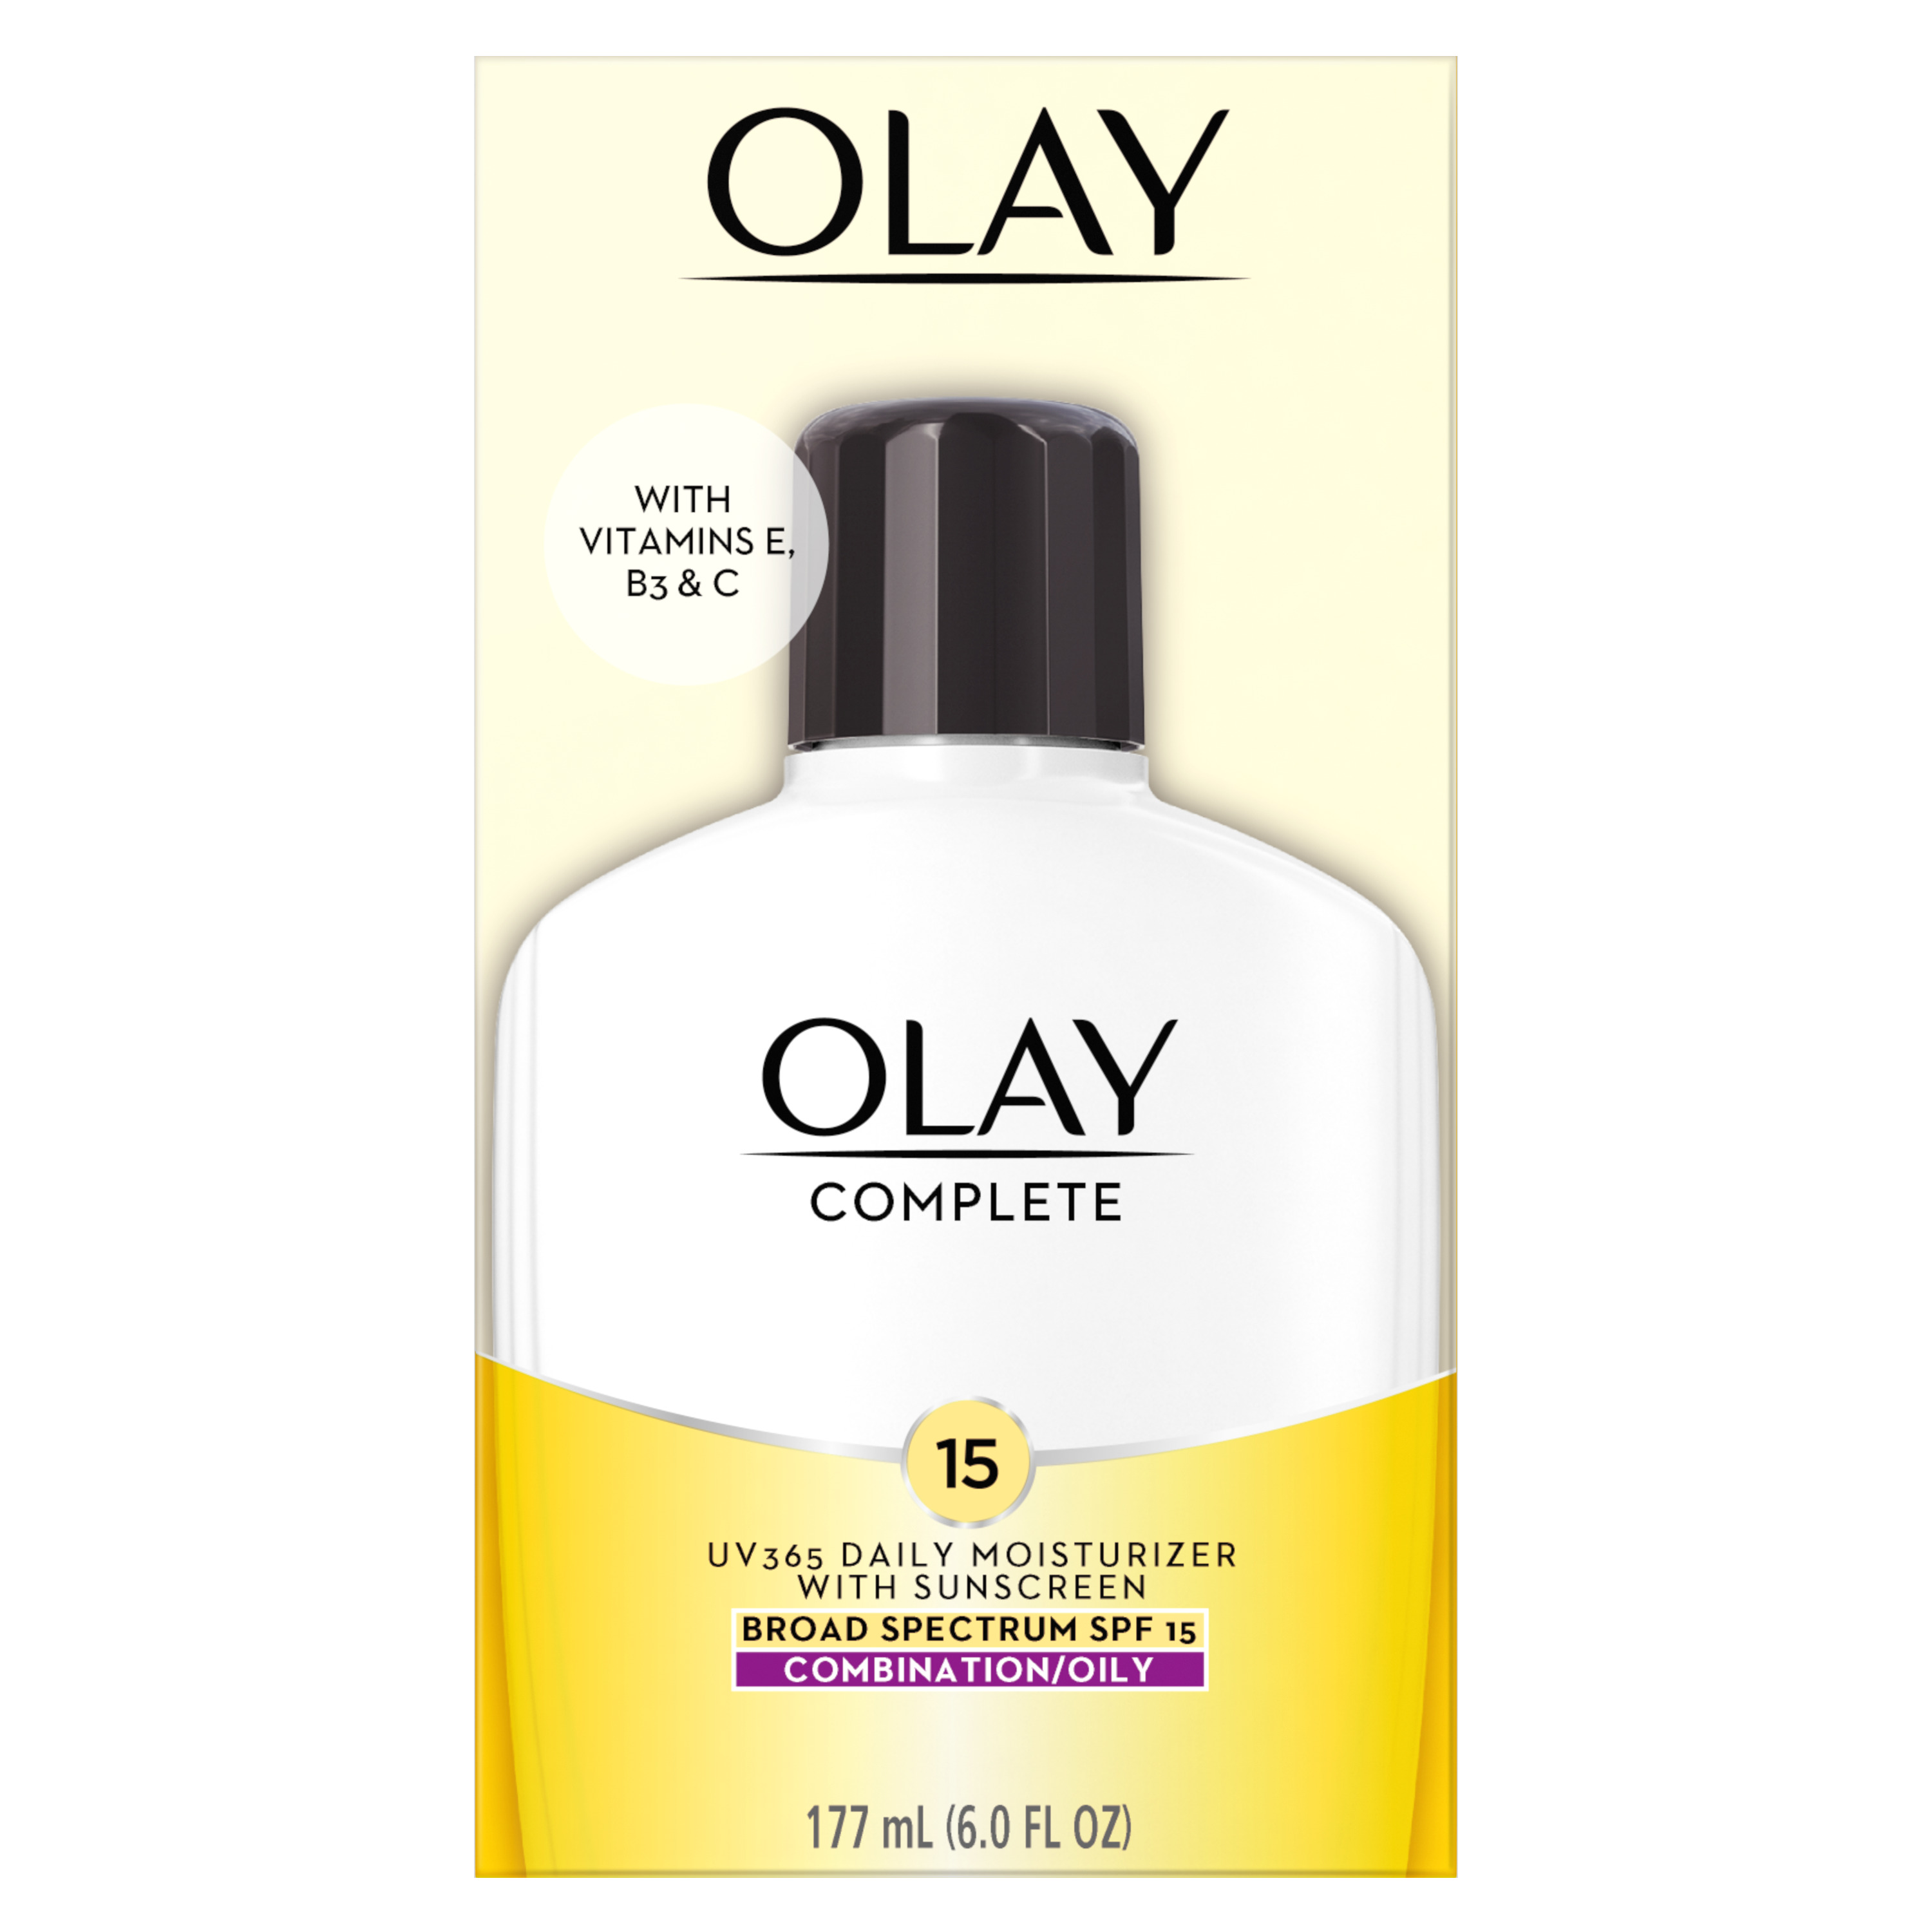 Olay Complete Daily Moisturizer for Oily Skin, SPF 15, 6 Fl Oz - image 1 of 10